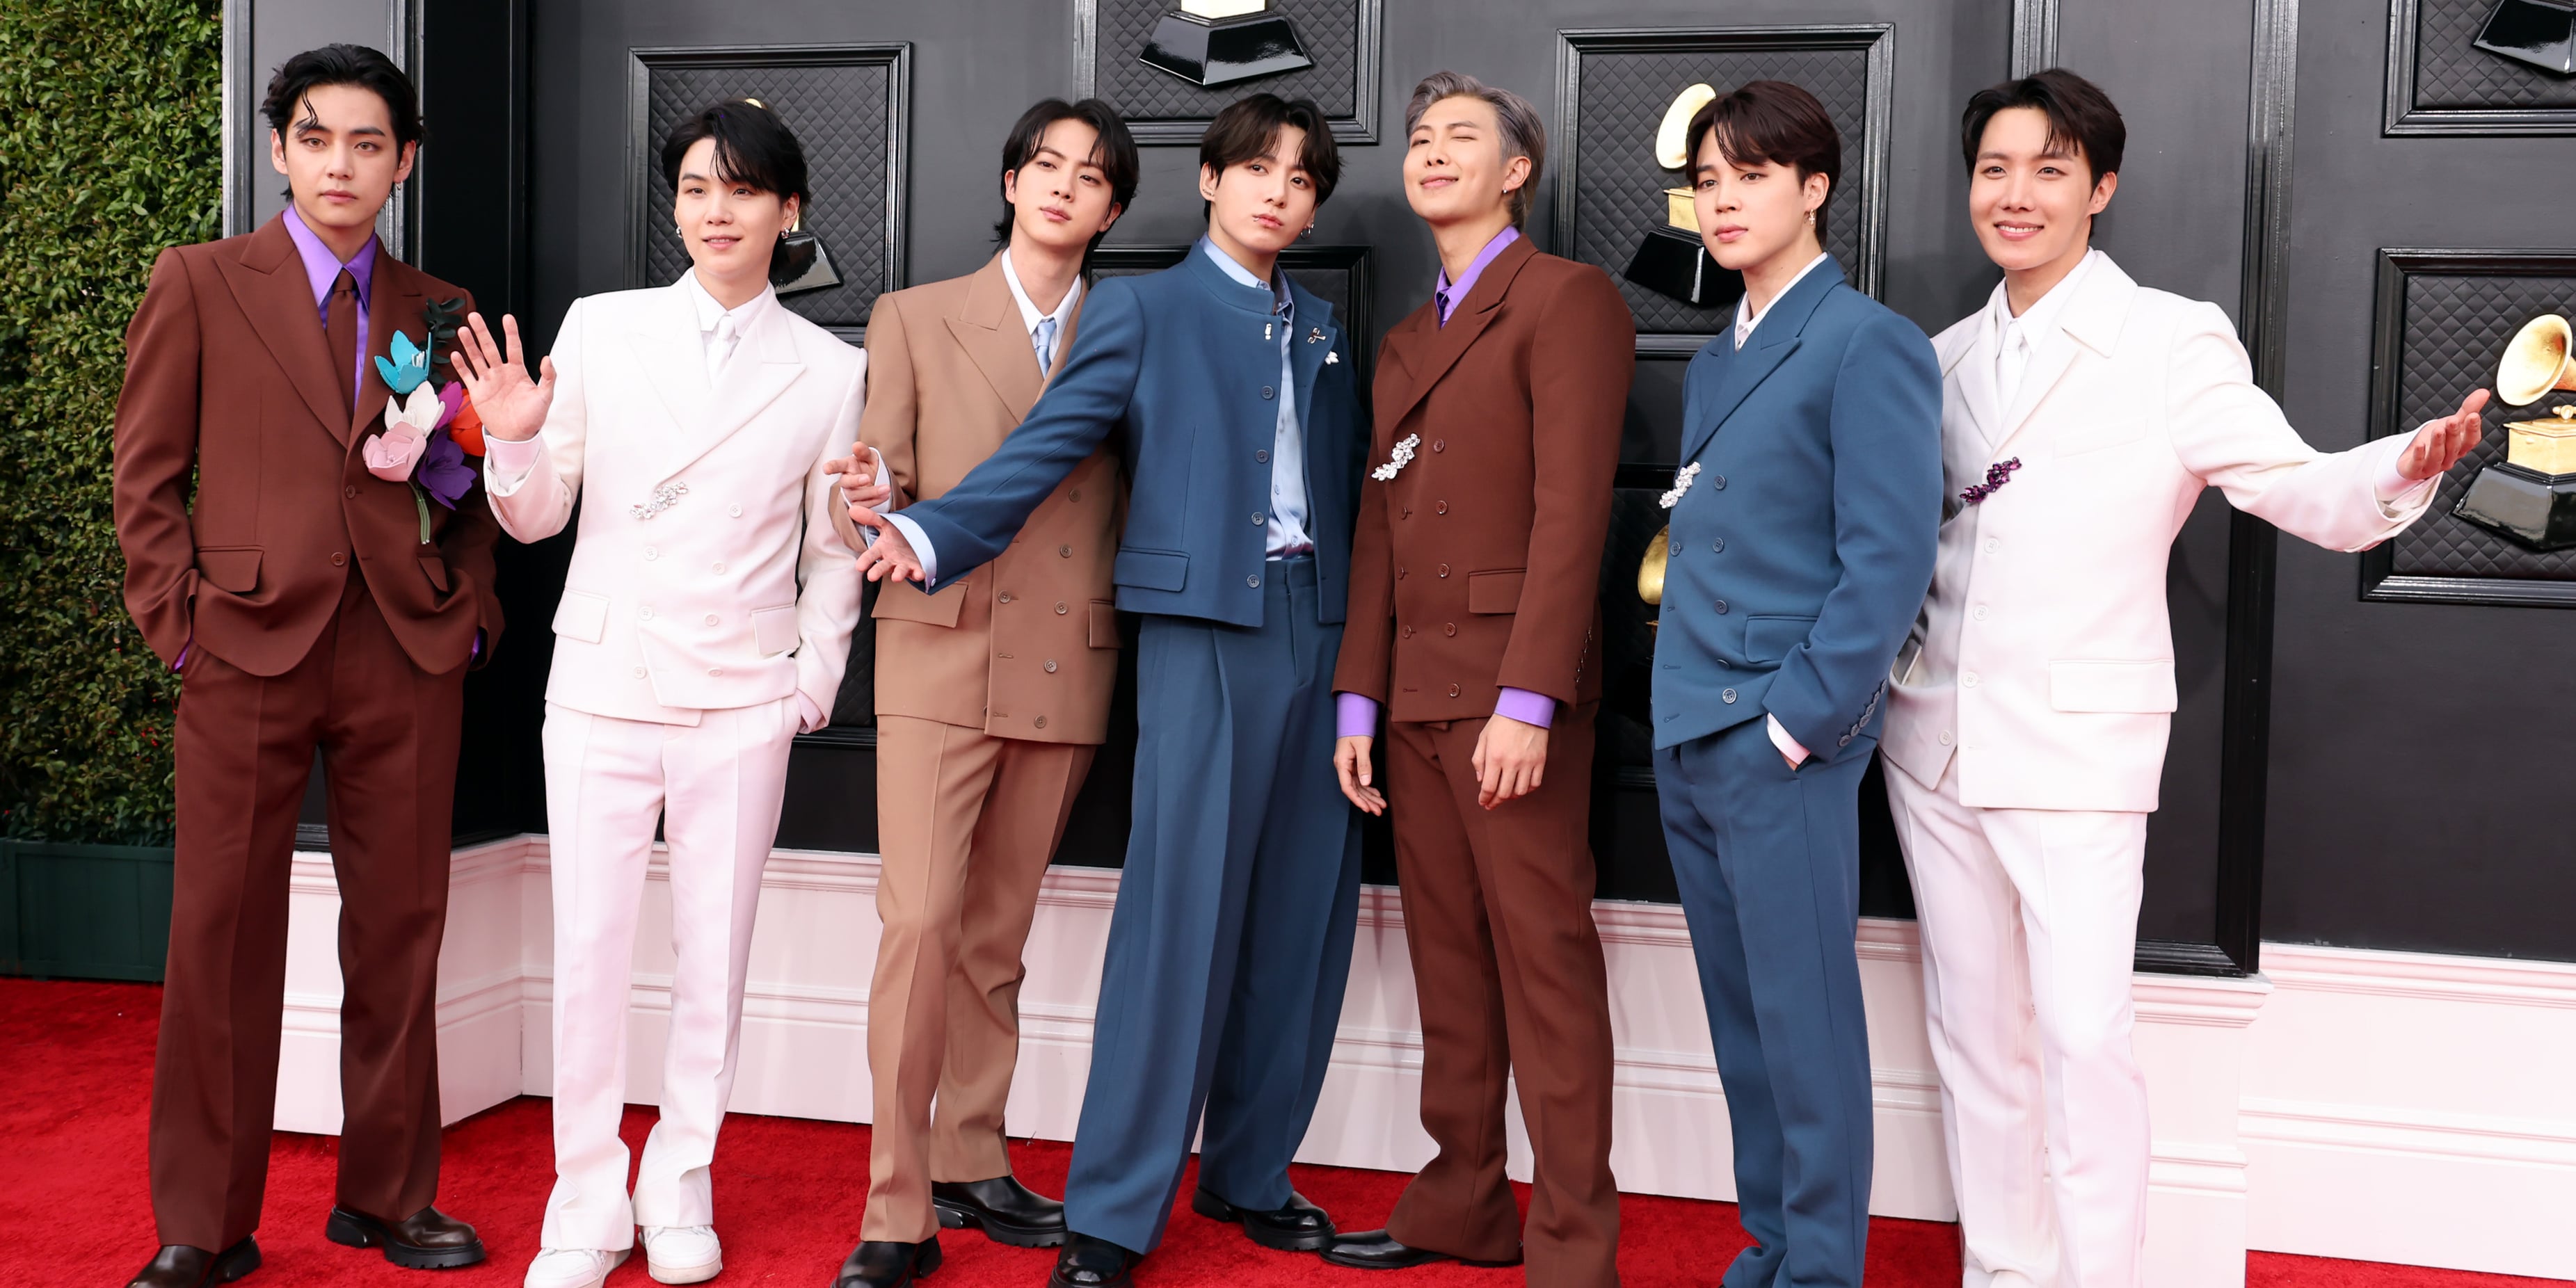 BTS takes another shot at Grammys - Asia News NetworkAsia News Network